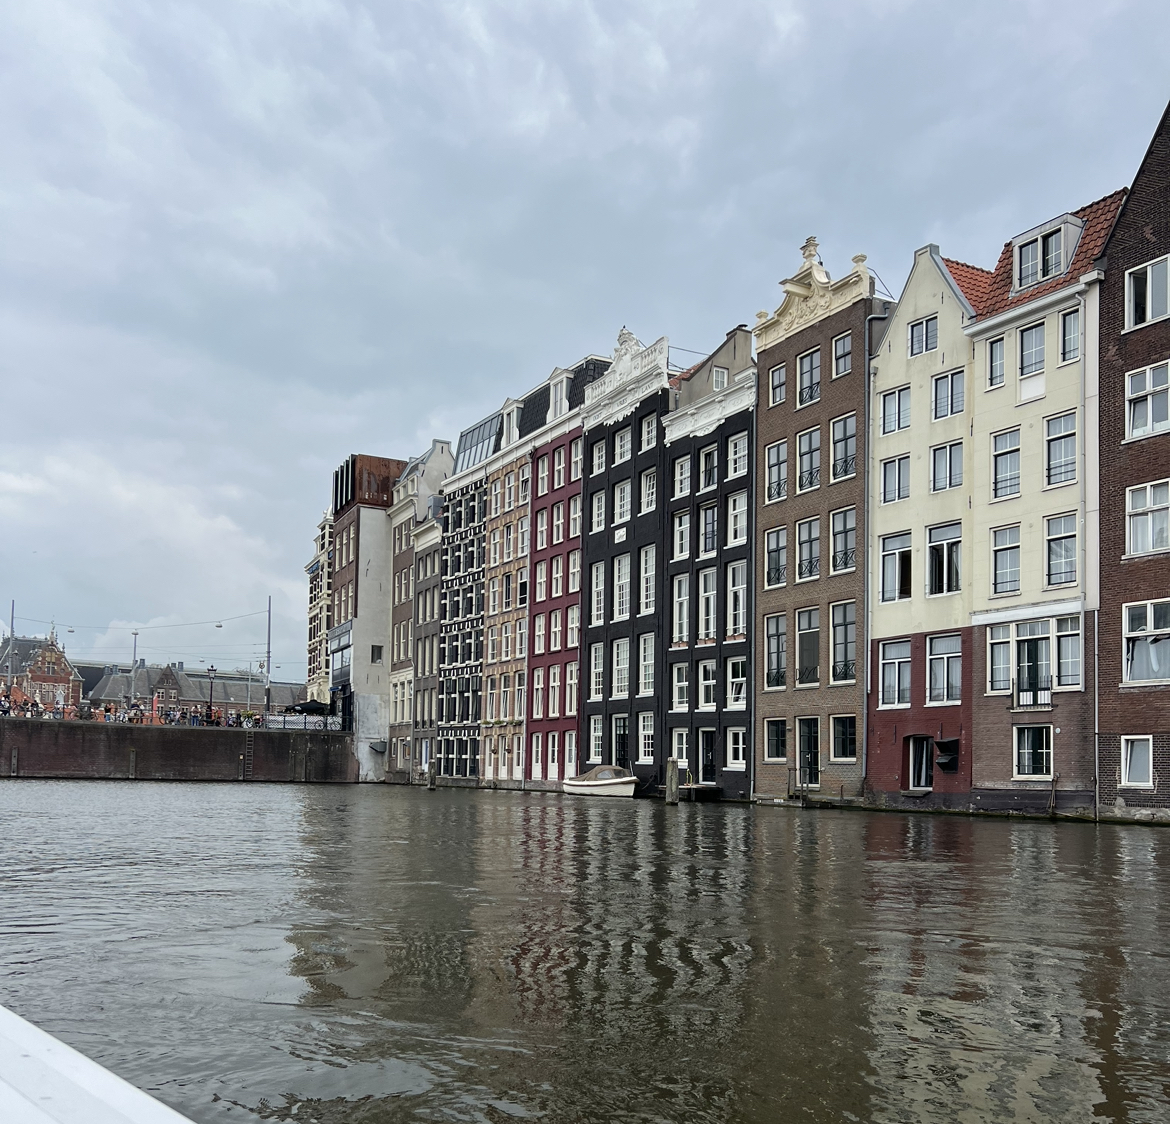 Amsterdam’s Deep rooted History